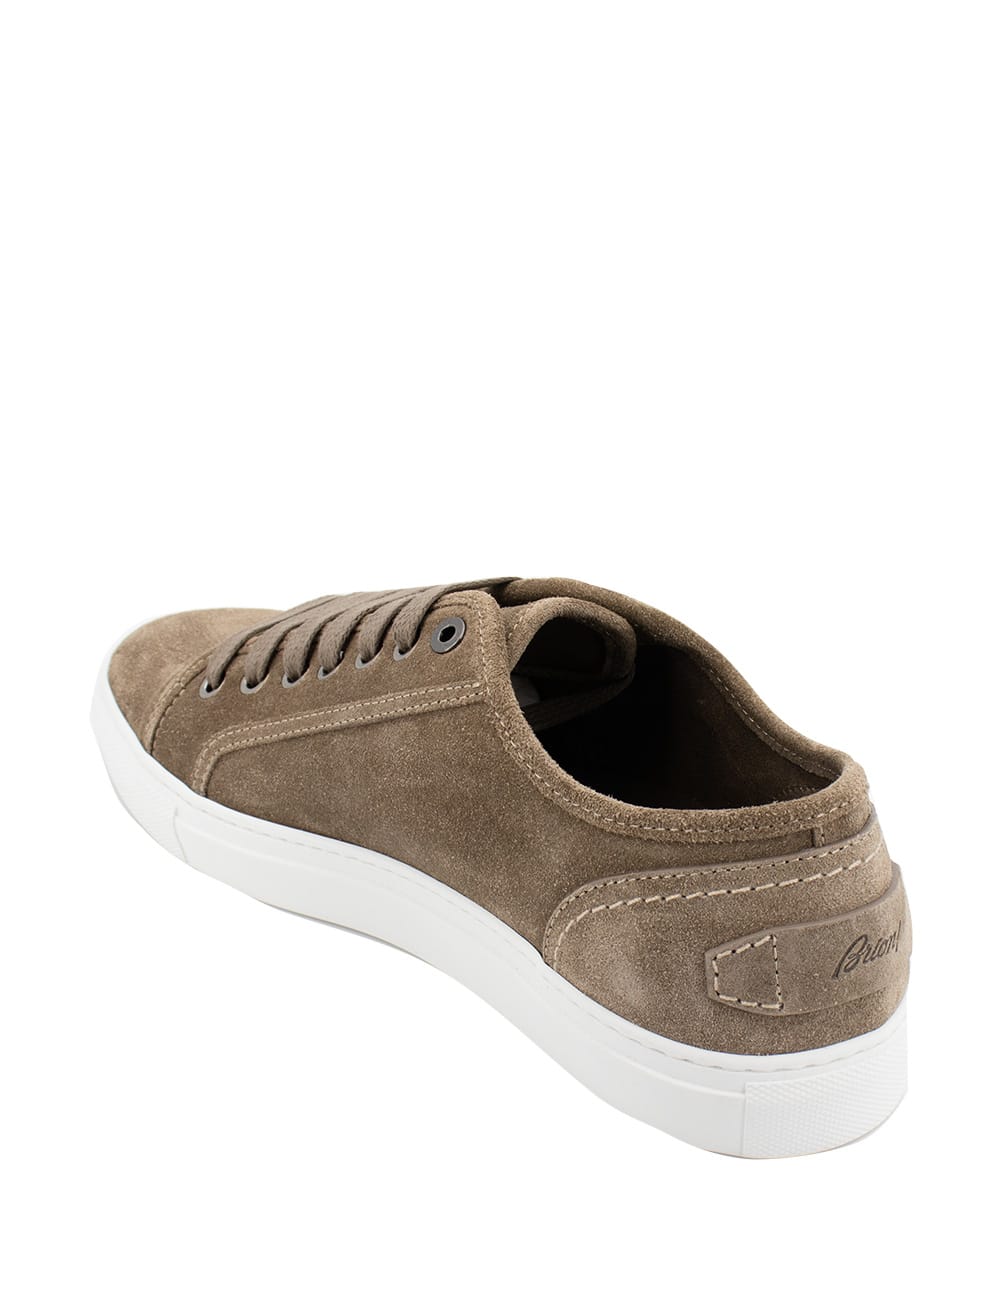 Shop Brioni Sneakers In Sand